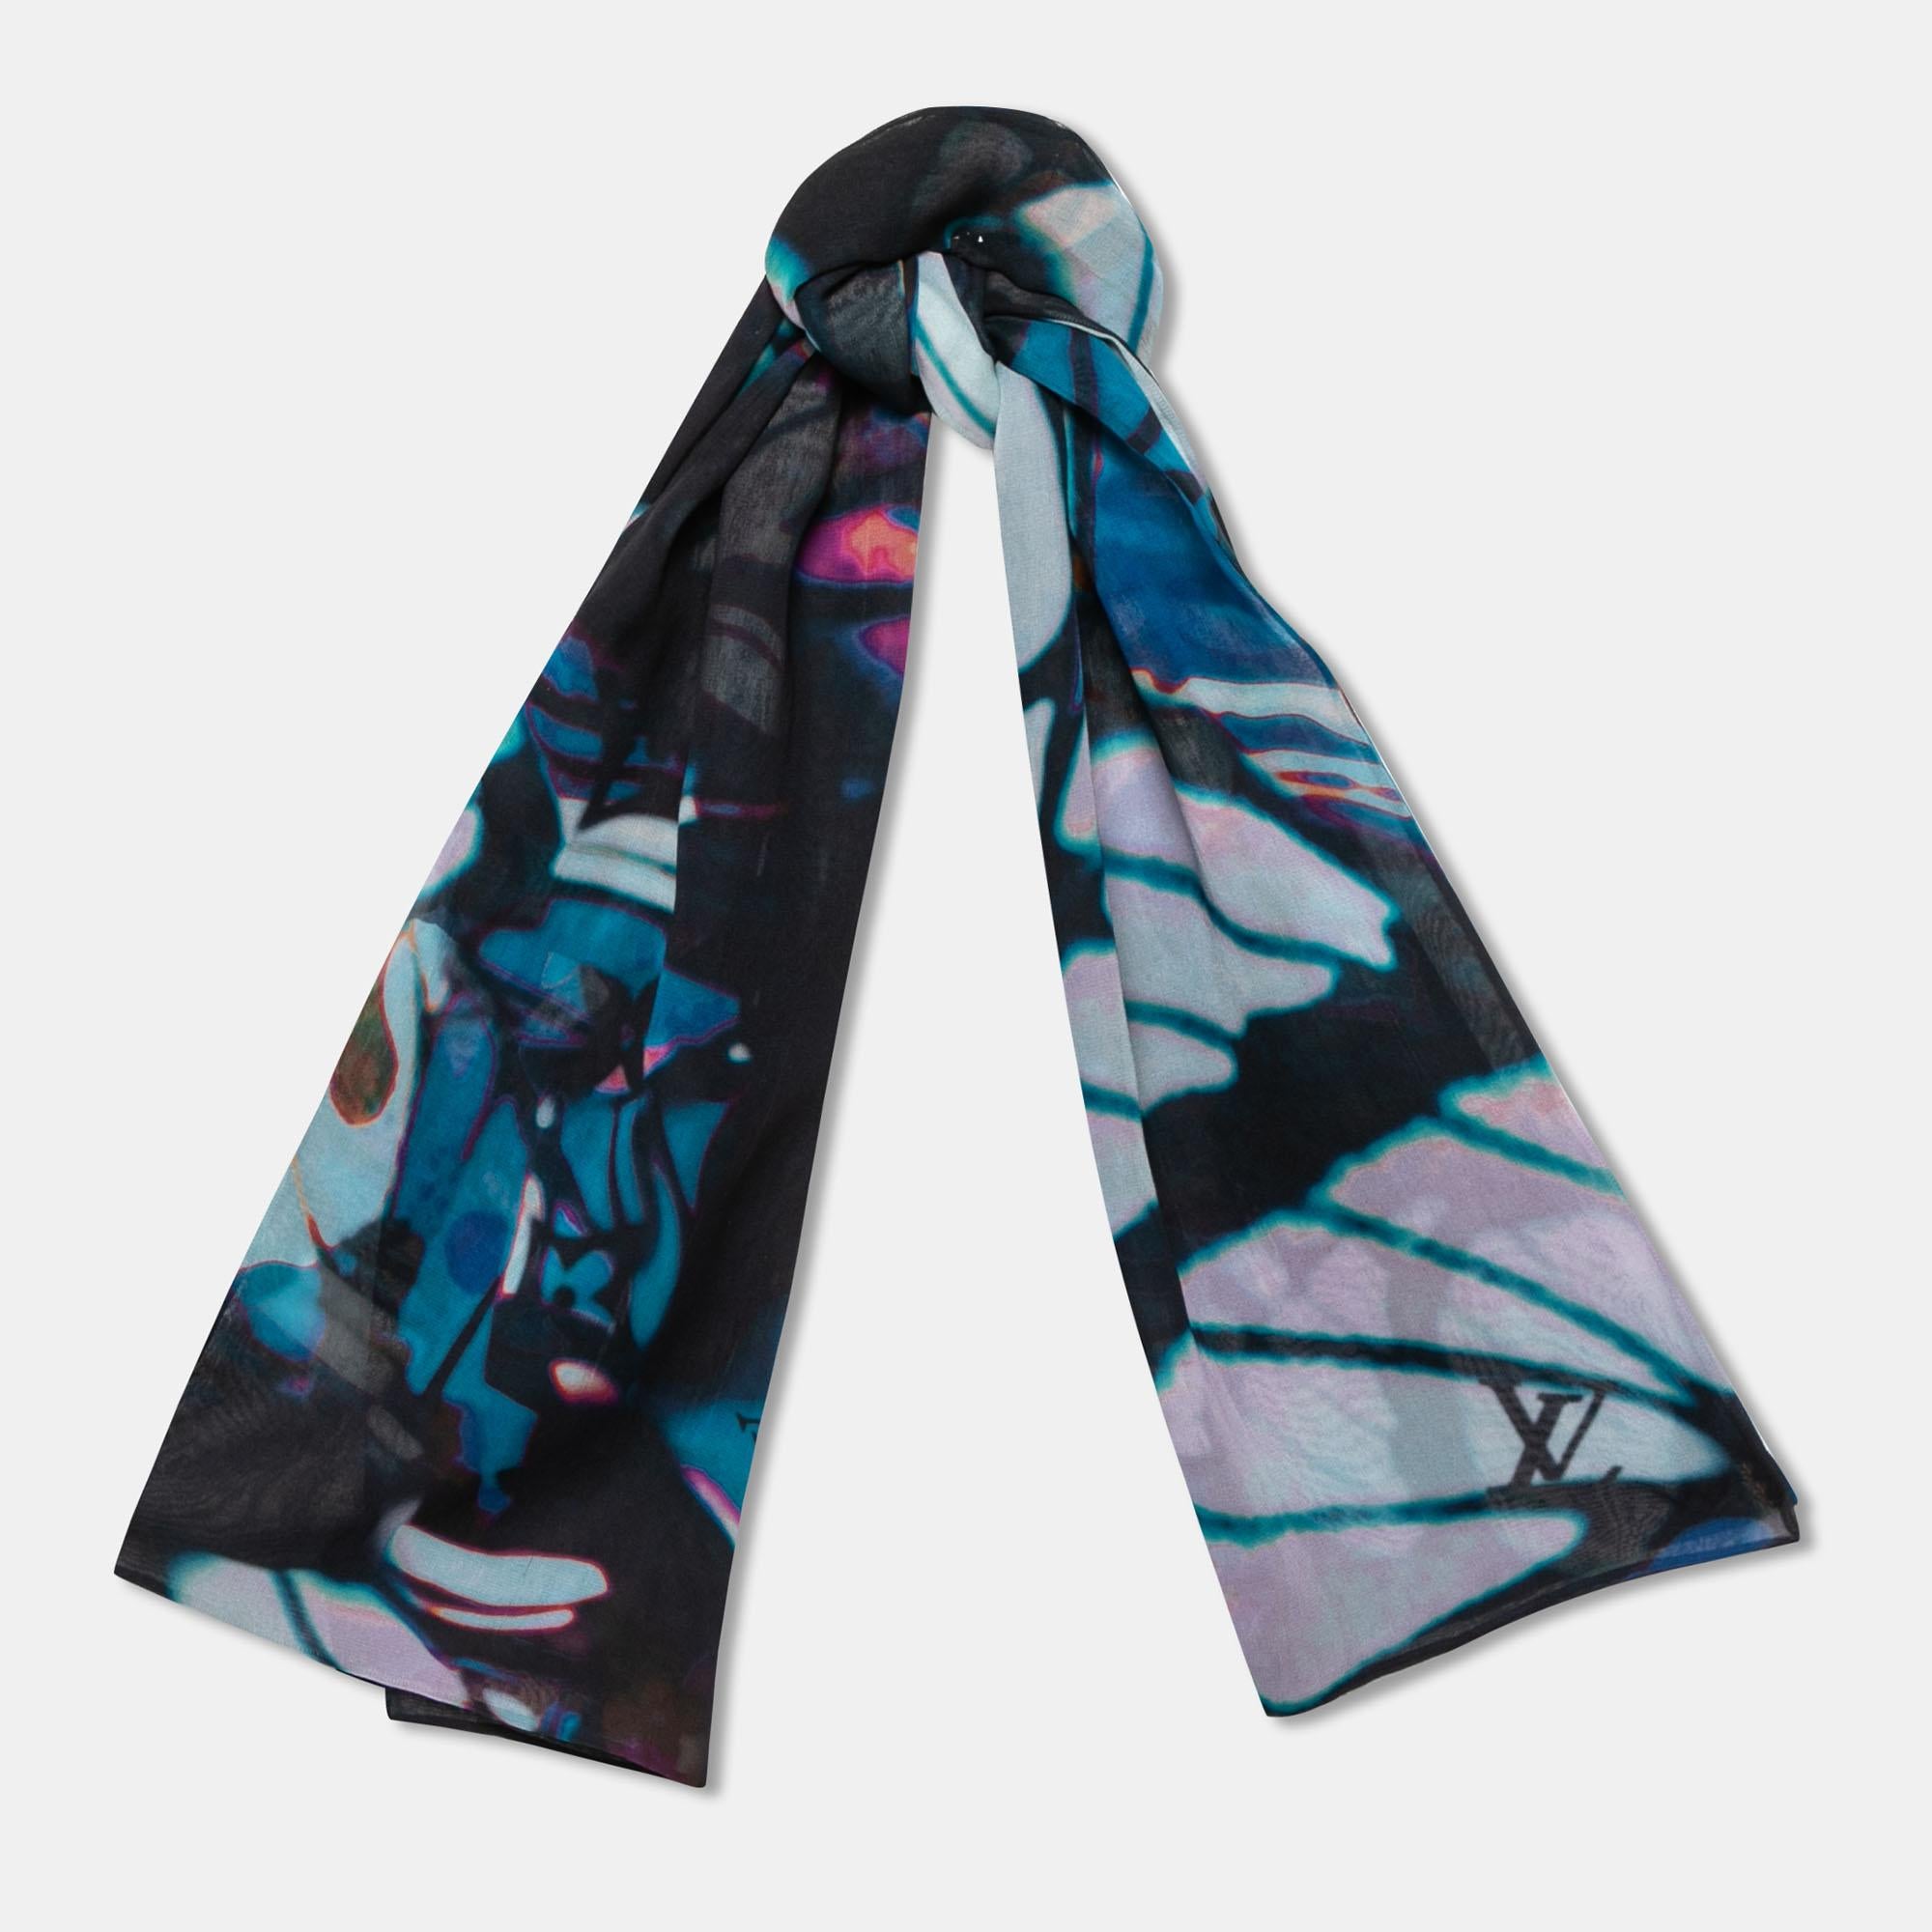 Classy and luxurious are some words that come to our minds when we think of Louis Vuitton. The label brings you this chic scarf made from silk in many shades. The highlight of the creation is the holographic pattern laid all over the surface.

